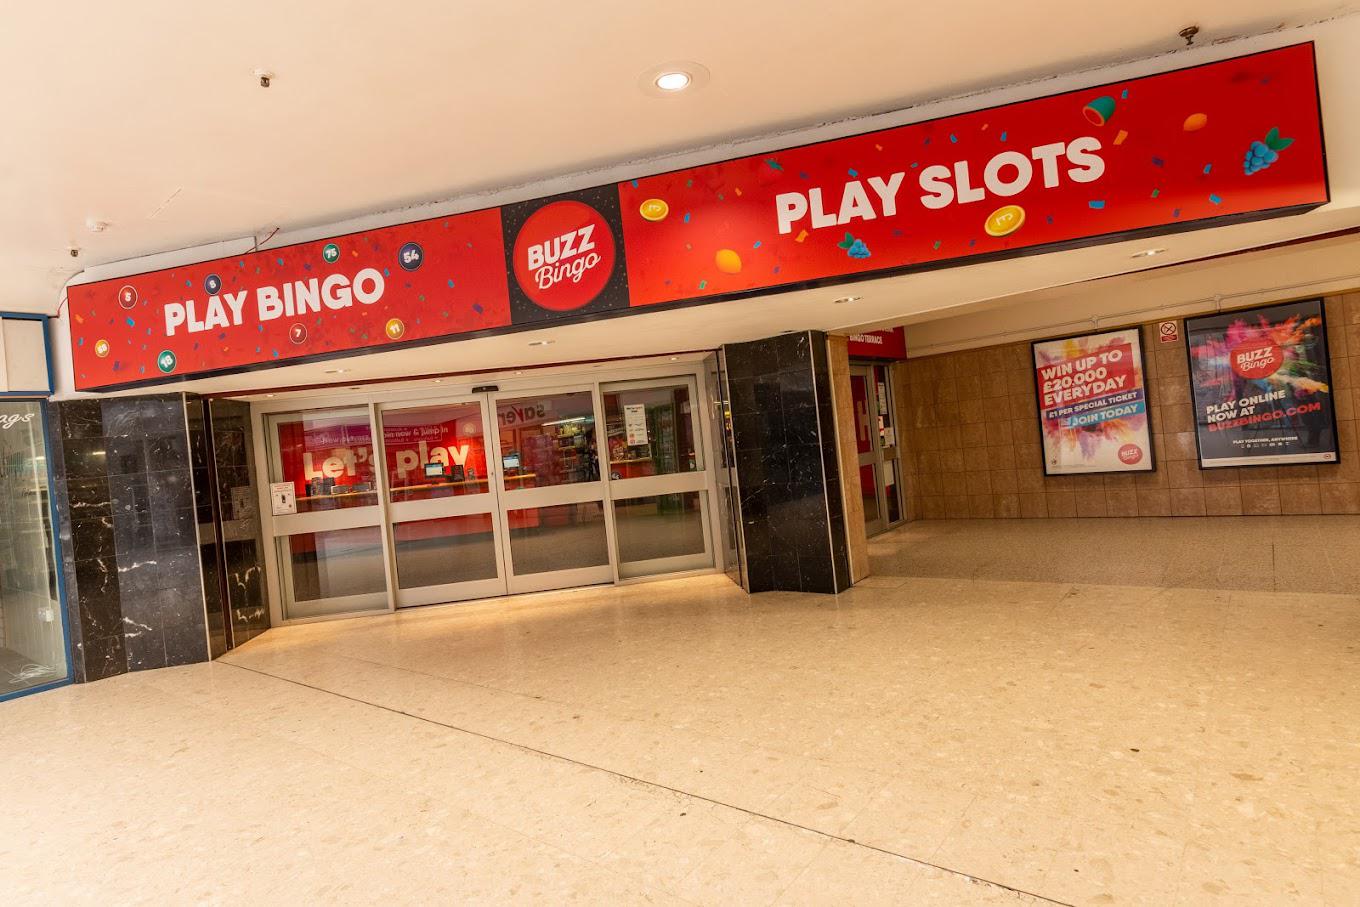 Buzz Bingo and The Slots Room South Shields South Shields 01914 975050